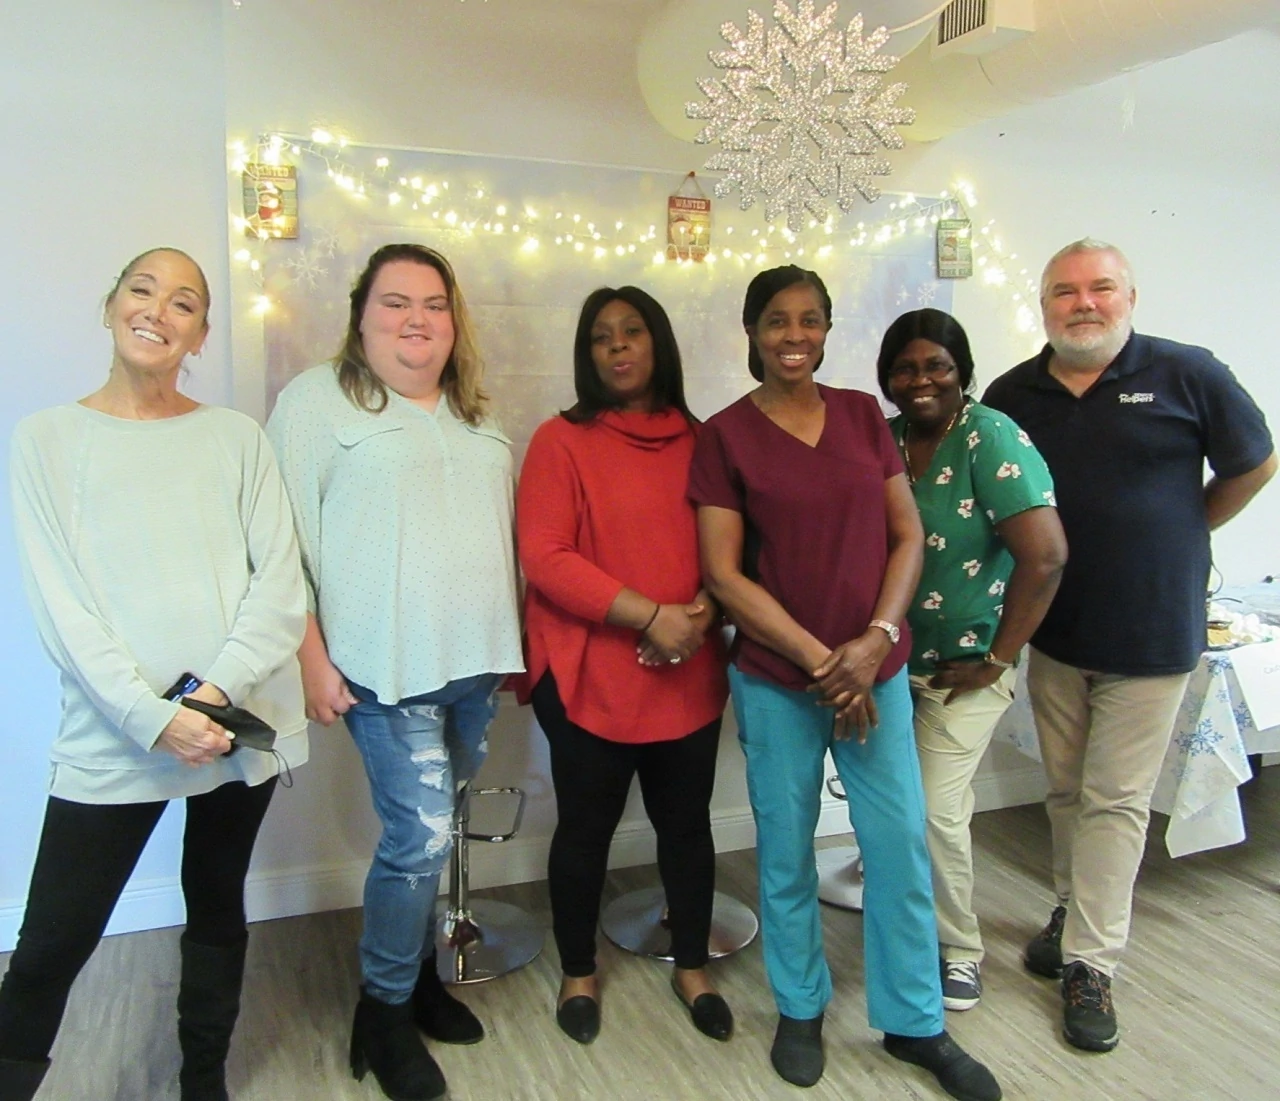 Group photo of caregivers and office staff at the Caregiver Holiday Event on December 17, 2021.